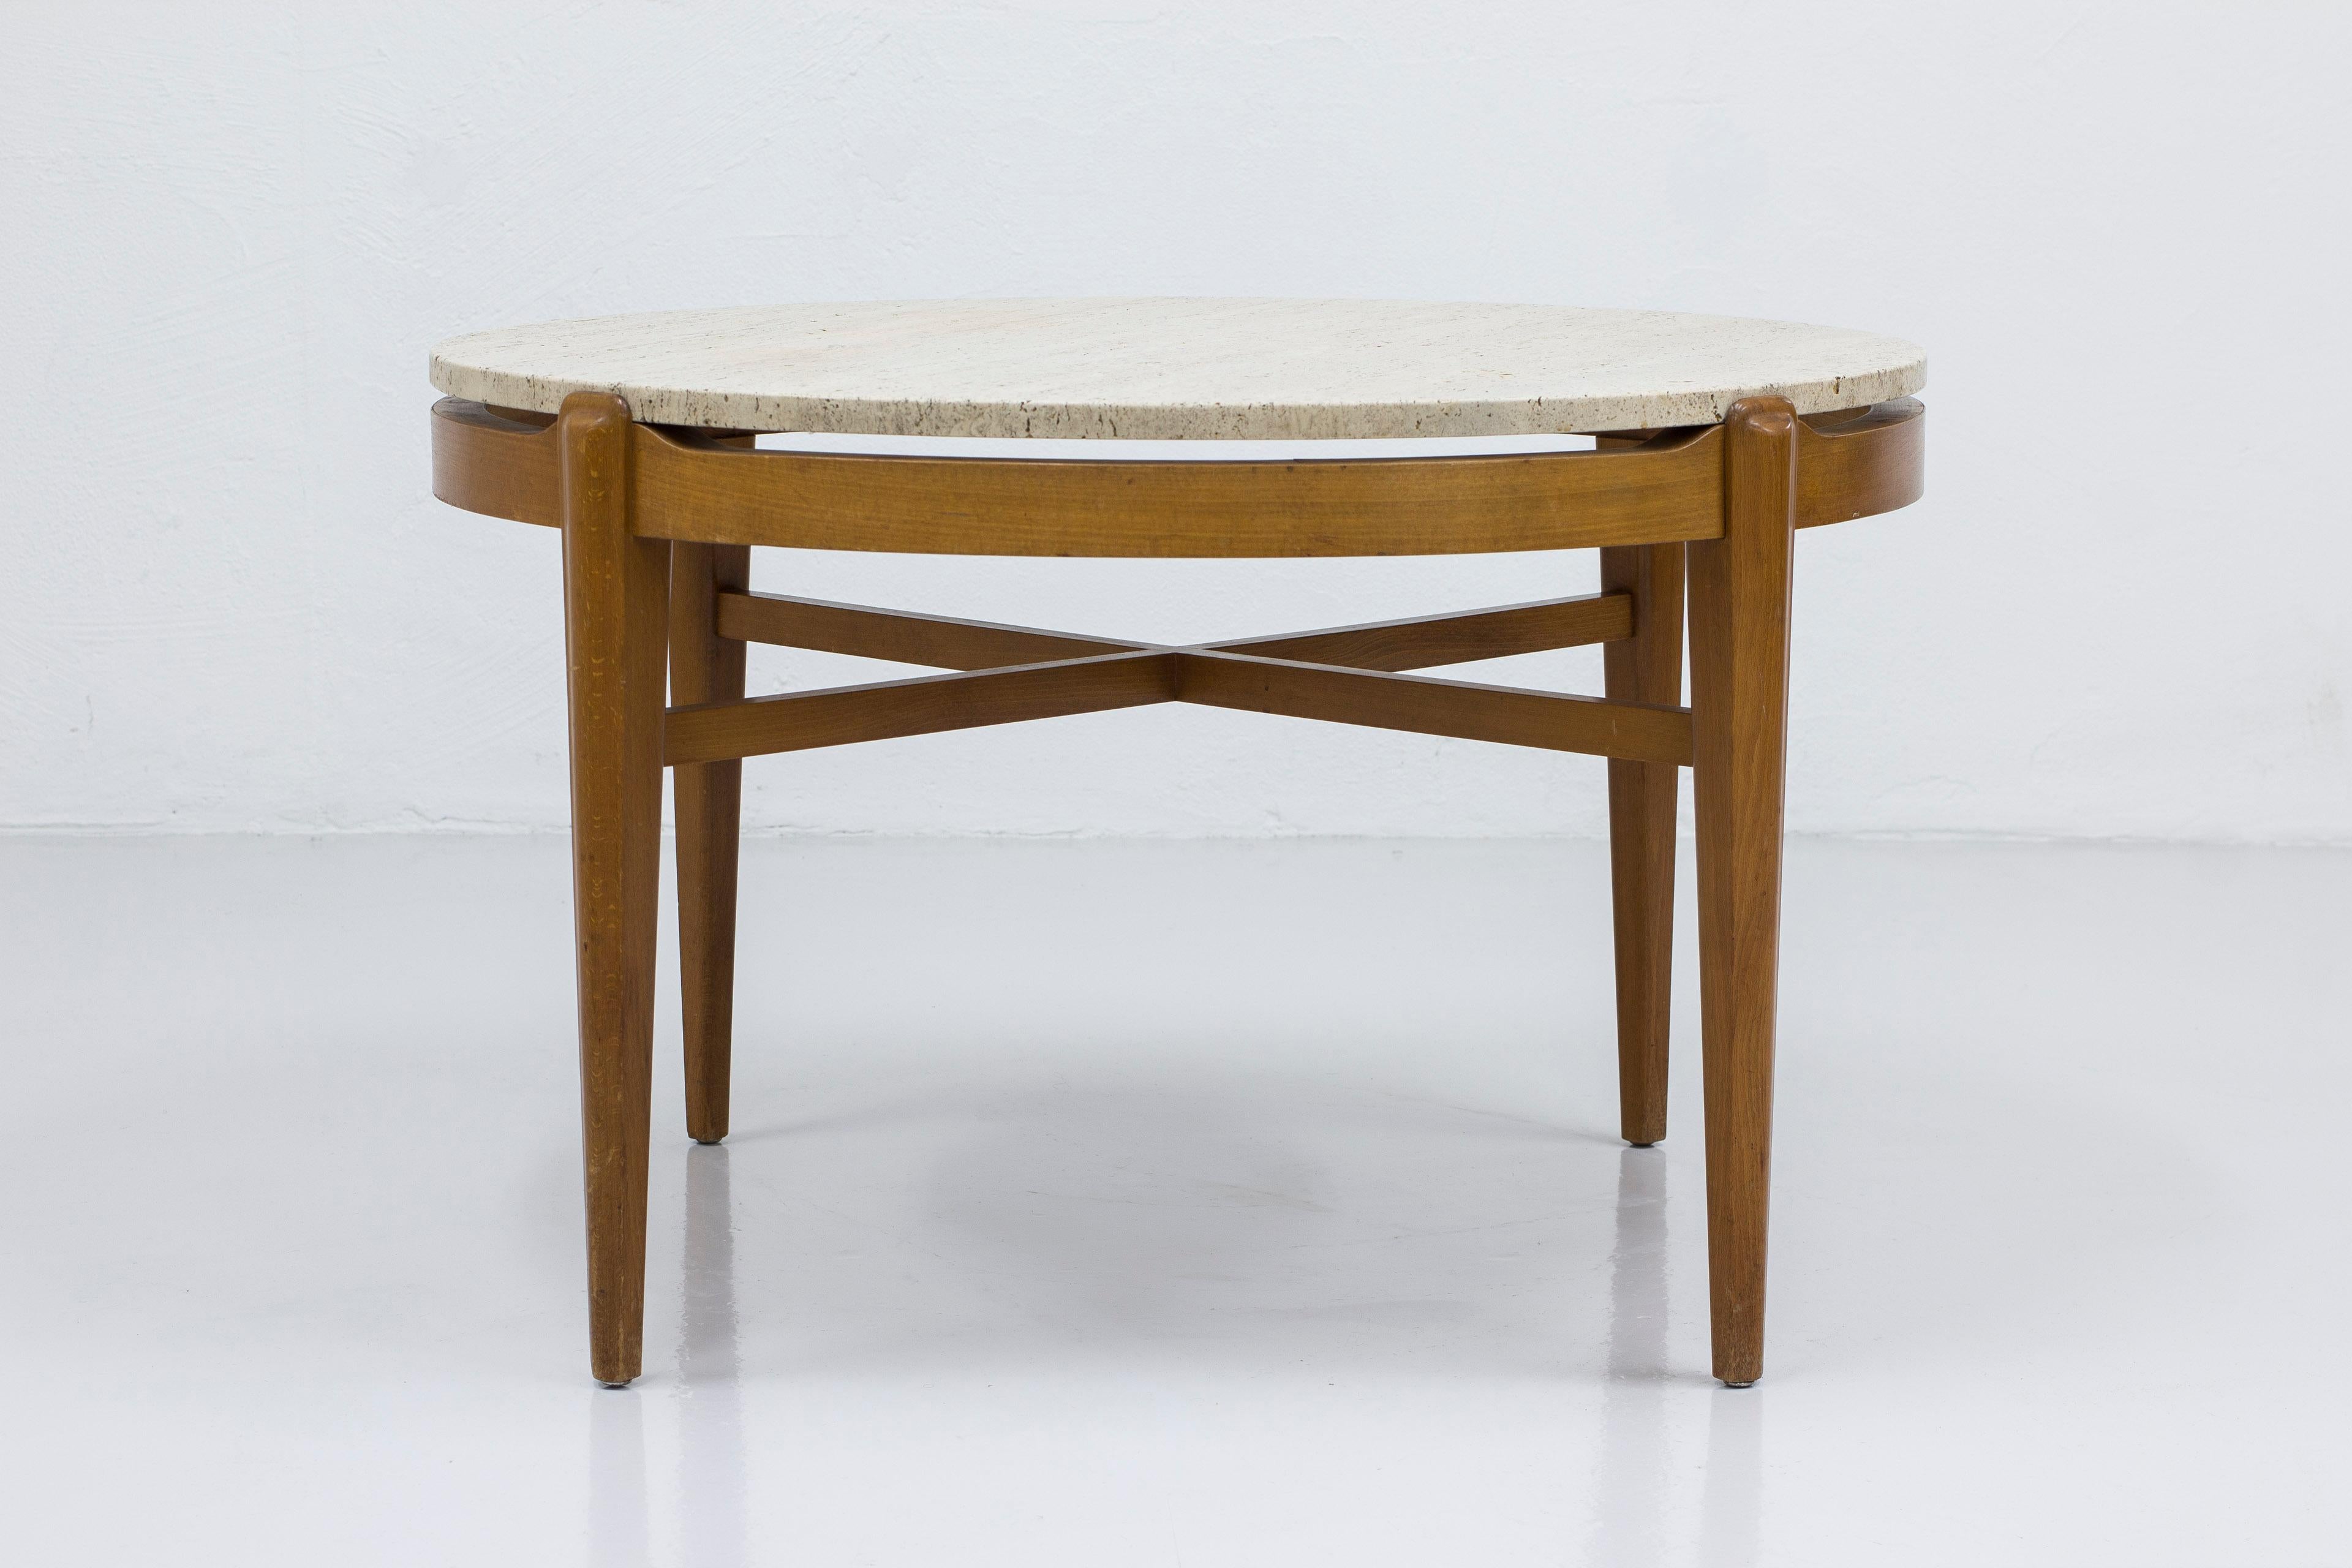 Swedish modern coffee table designed and made in Sweden. Produced between the 1940-50s. Made from stained beech with tapered legs and travertine table top. Very good vintage condition with light age related wear and patina.



Designer: